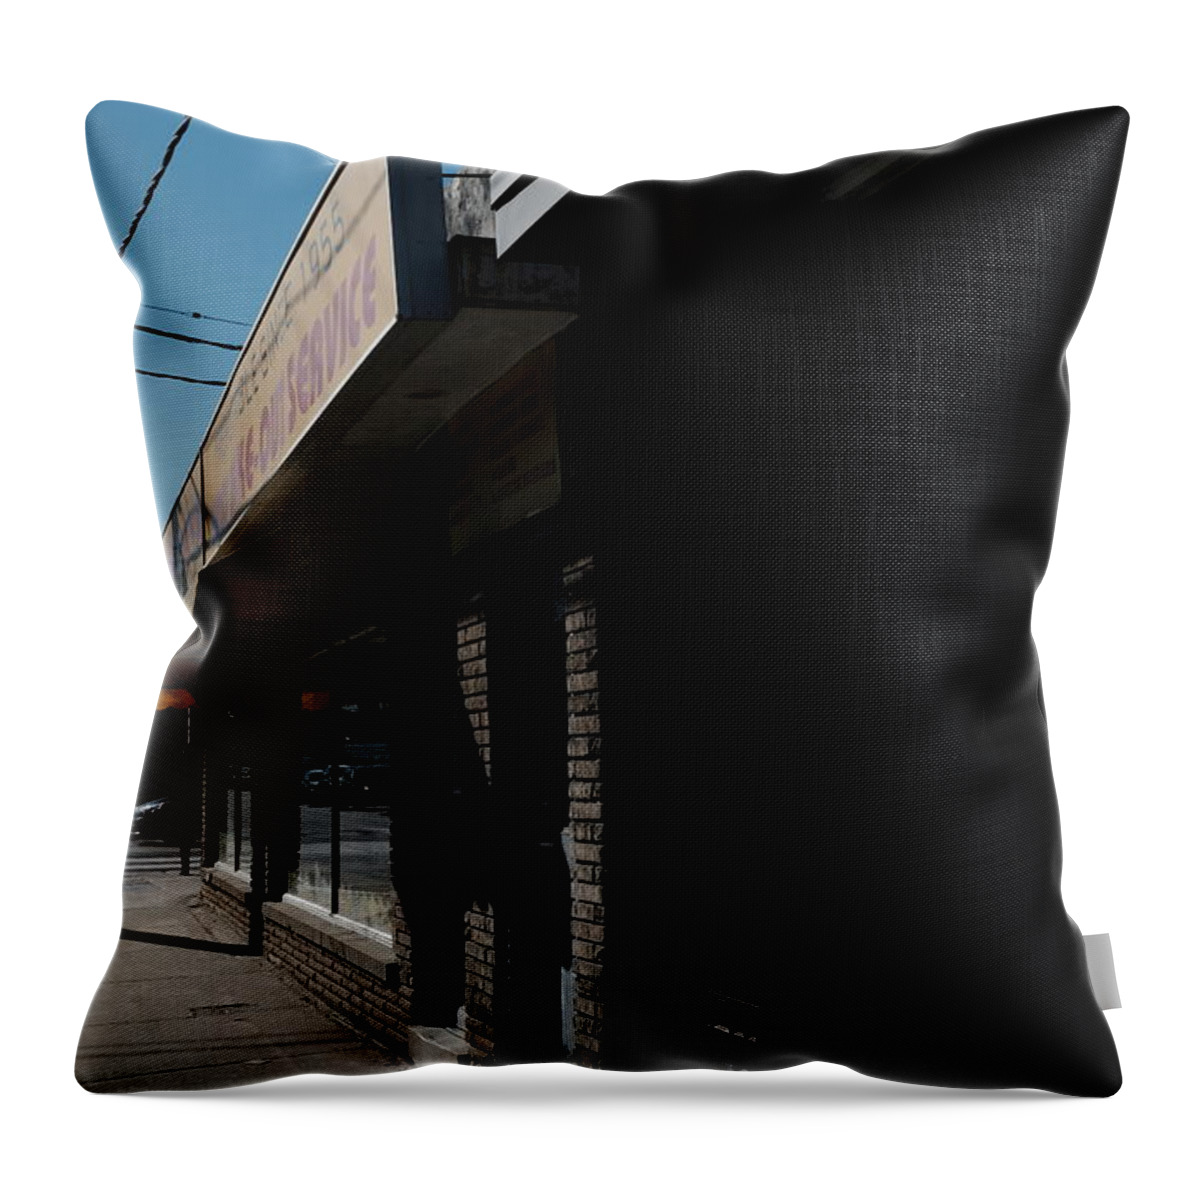 Urban Throw Pillow featuring the photograph Bread Crates by Kreddible Trout